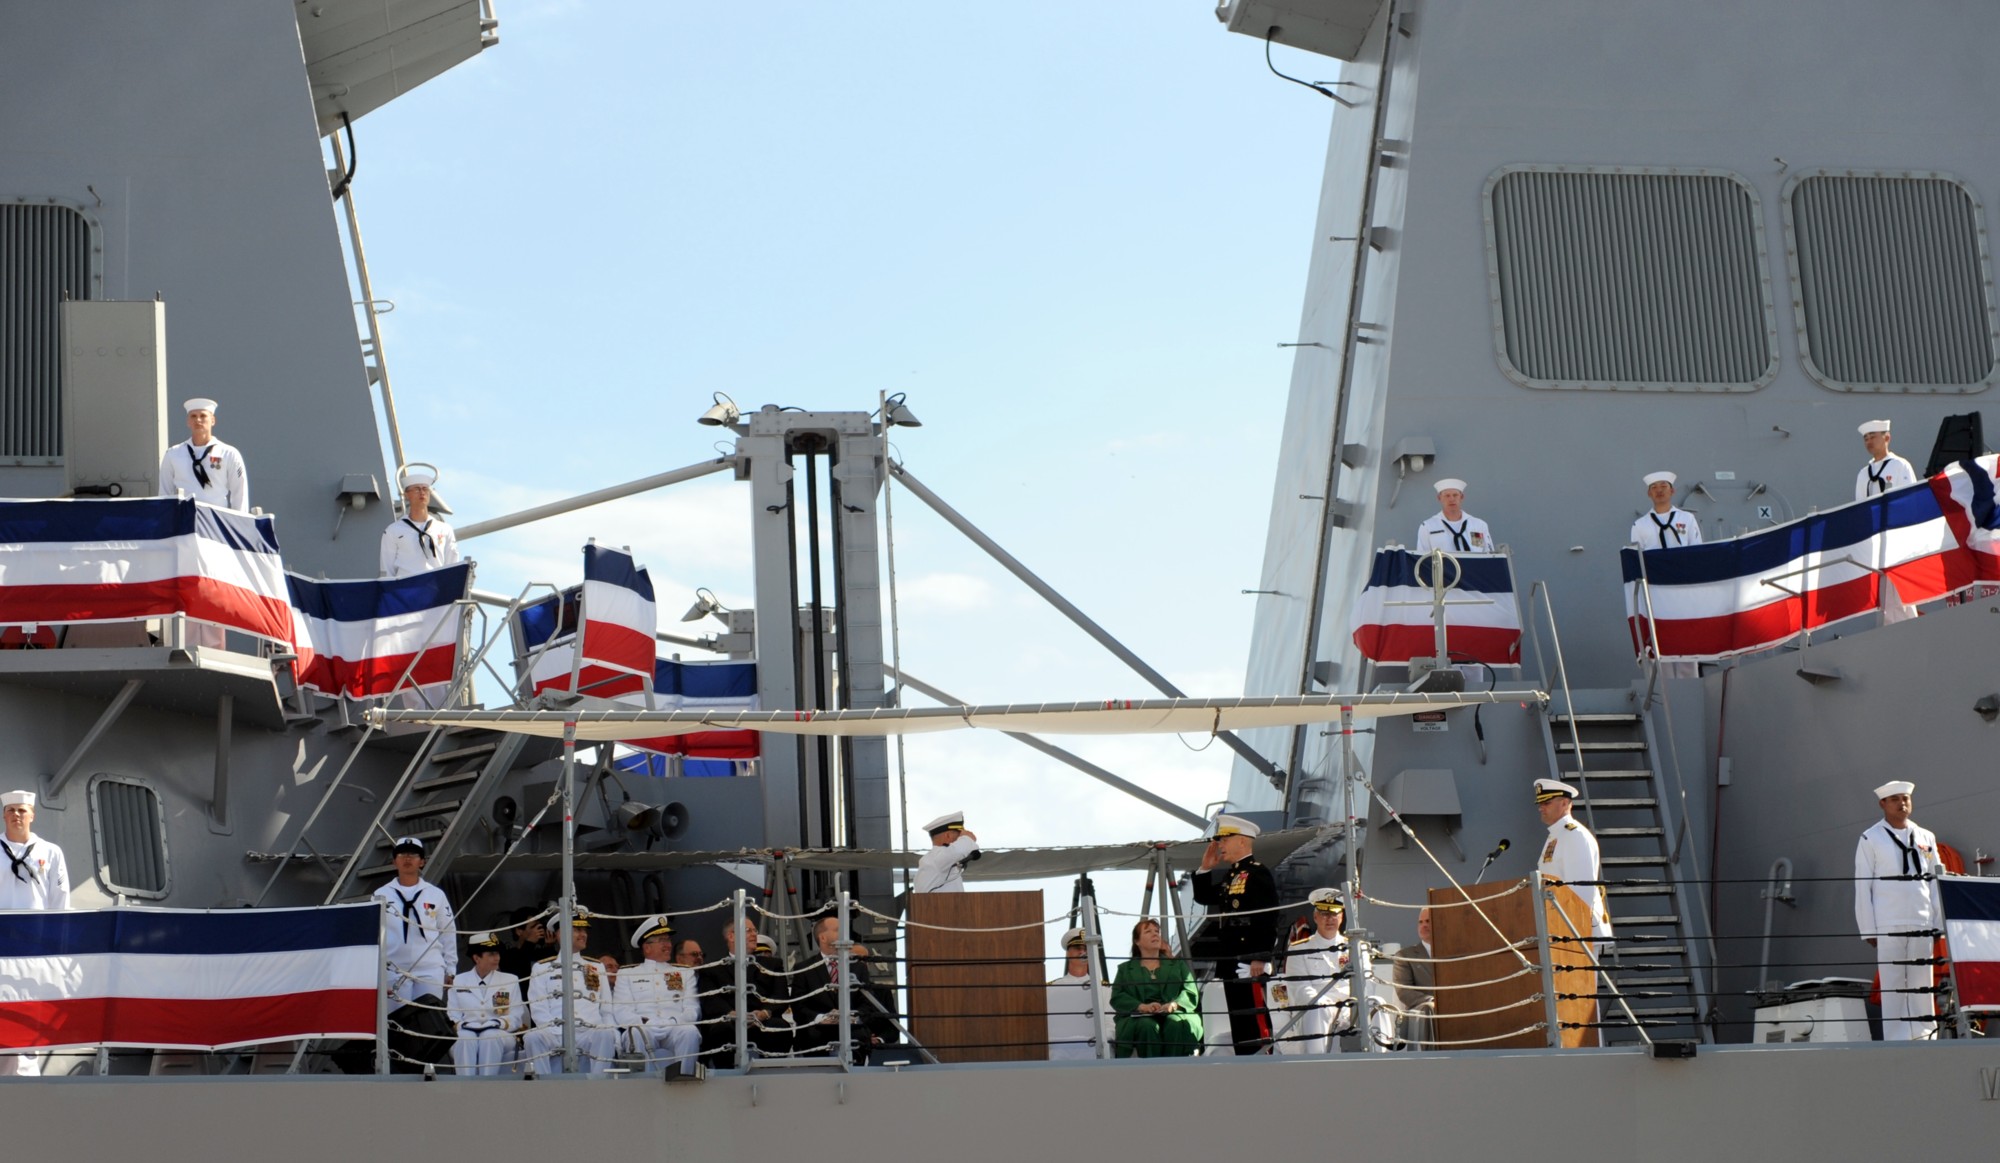 ddg-109 uss jason dunham arleigh burke class guided missile destroyer aegis us navy commissioning ceremony port everglades florida 72p